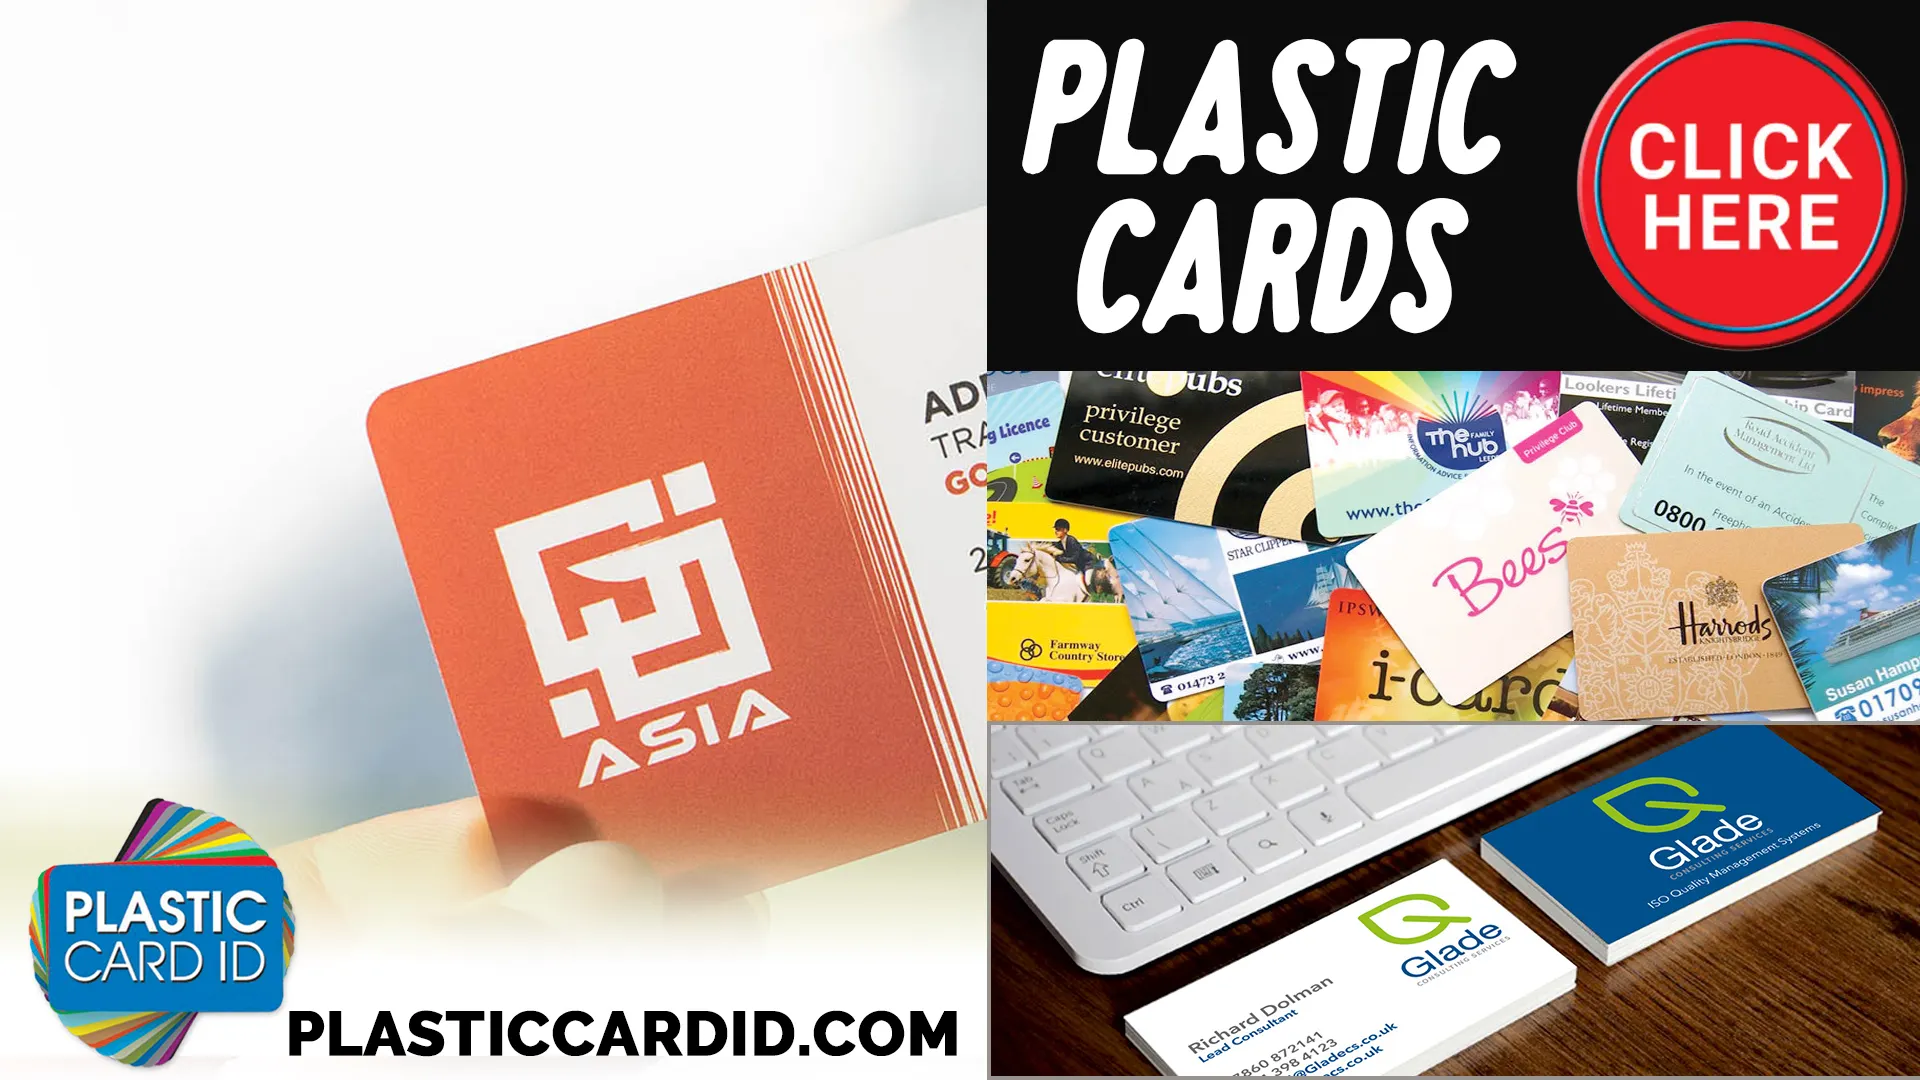 Plastic Card ID
: A Customer-Centric Approach to Long-Lasting Cards